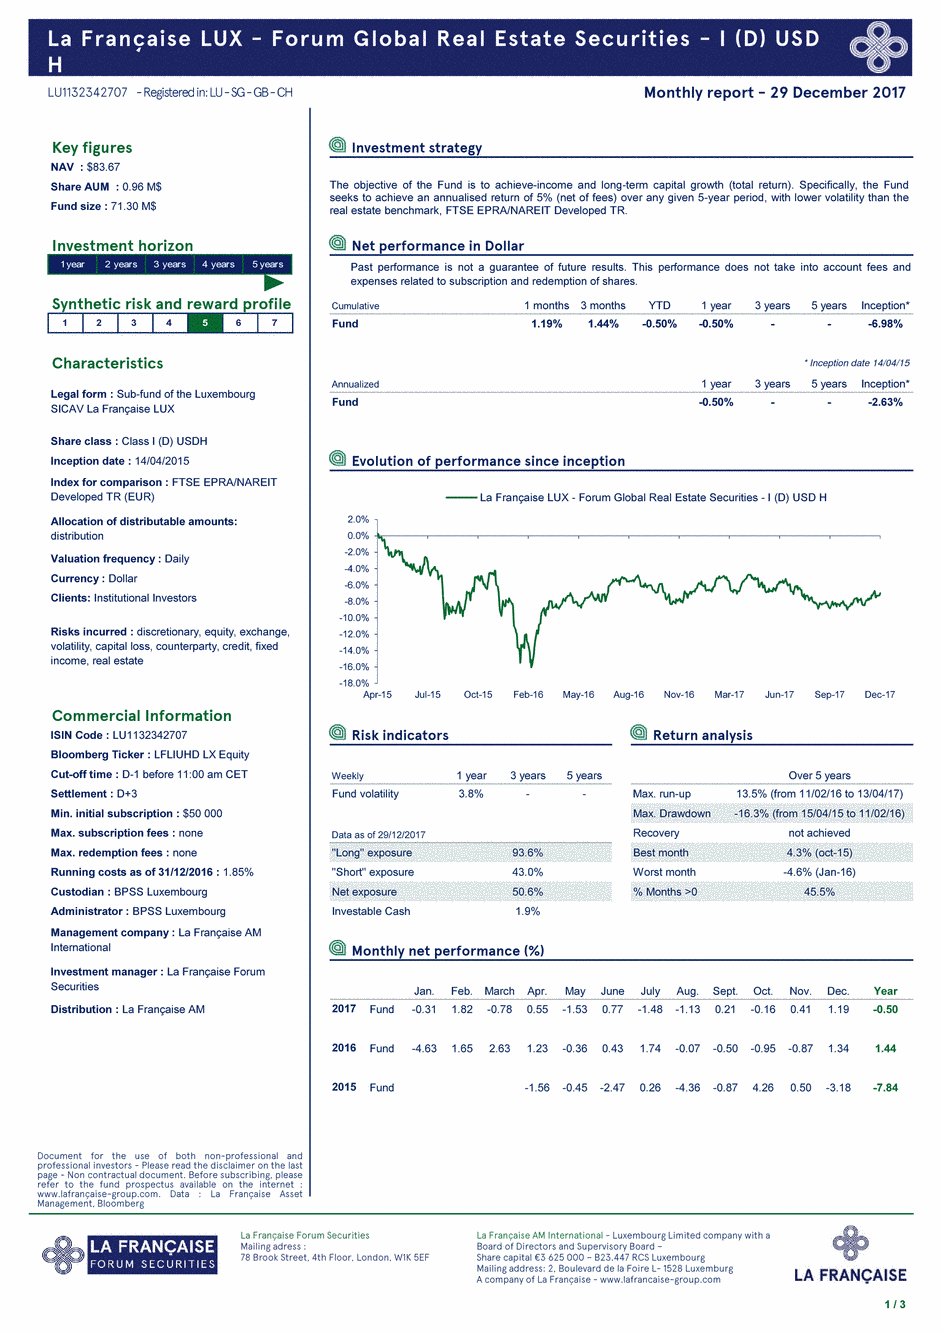 Reporting La Française LUX - Forum Global Real Estate Securities - I (D) USD H - 31/12/2017 - English